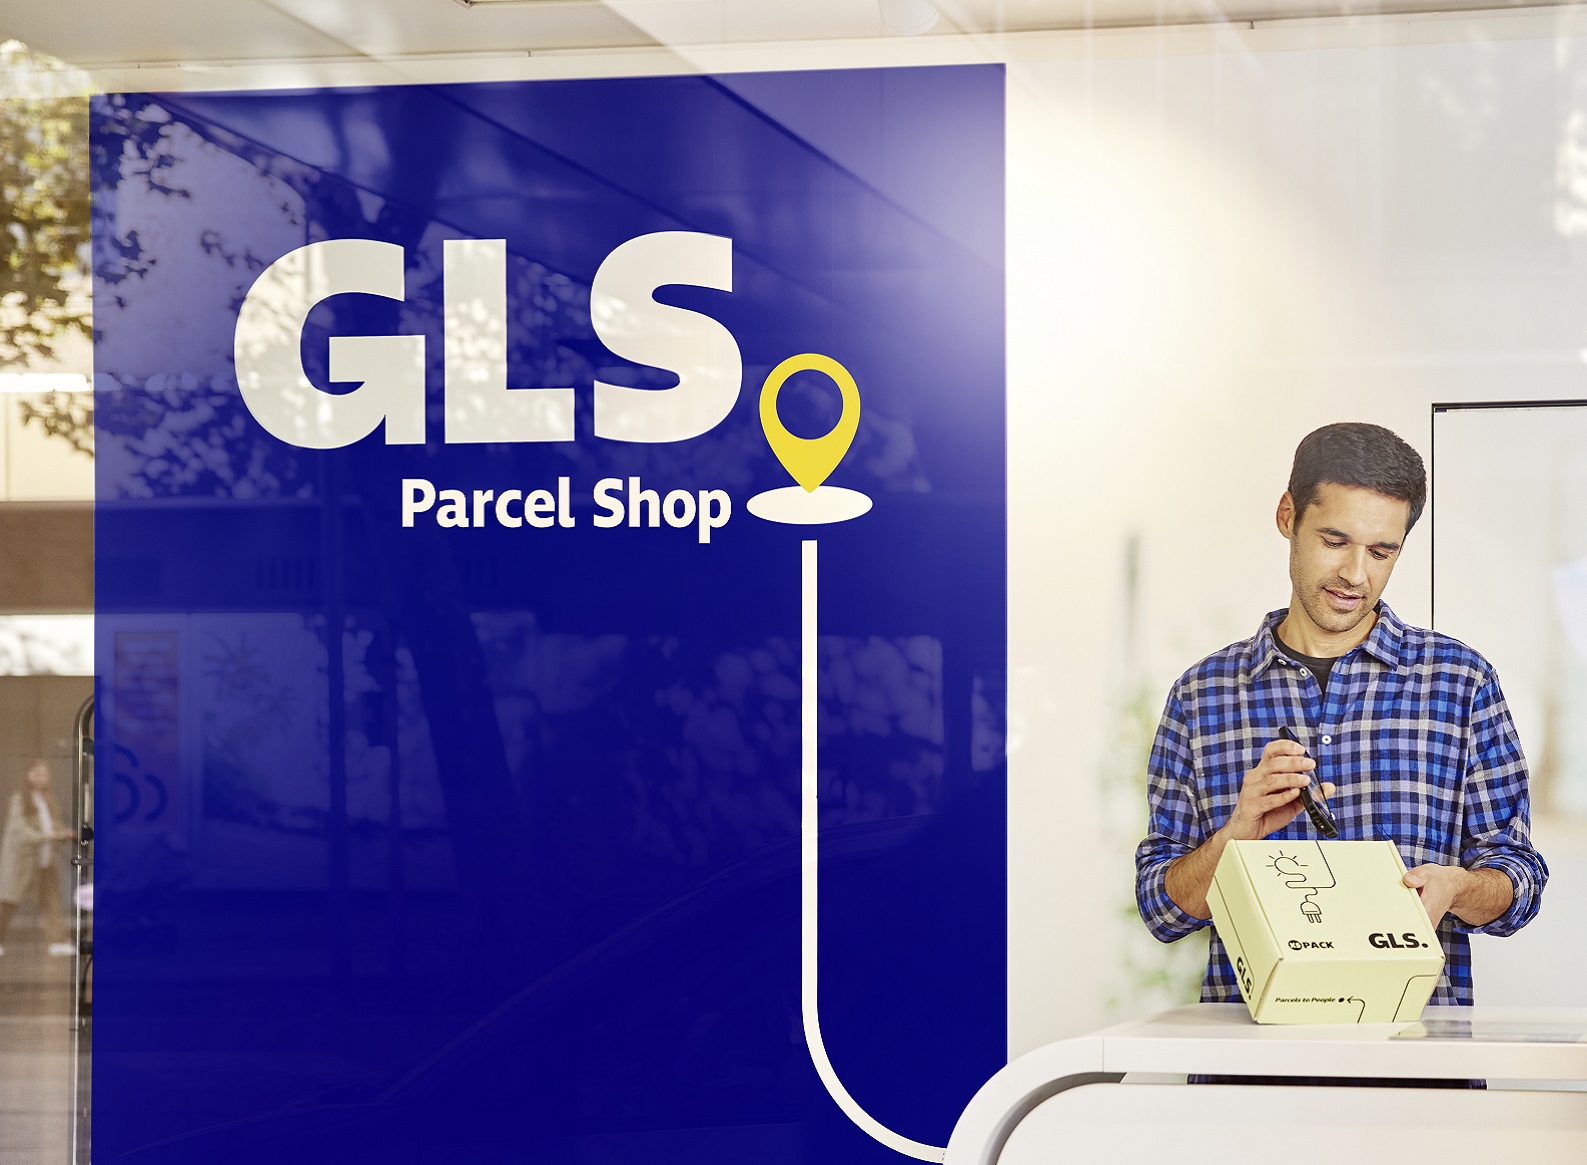 A man comes out of a GLS parcel shop carrying a package under his arm